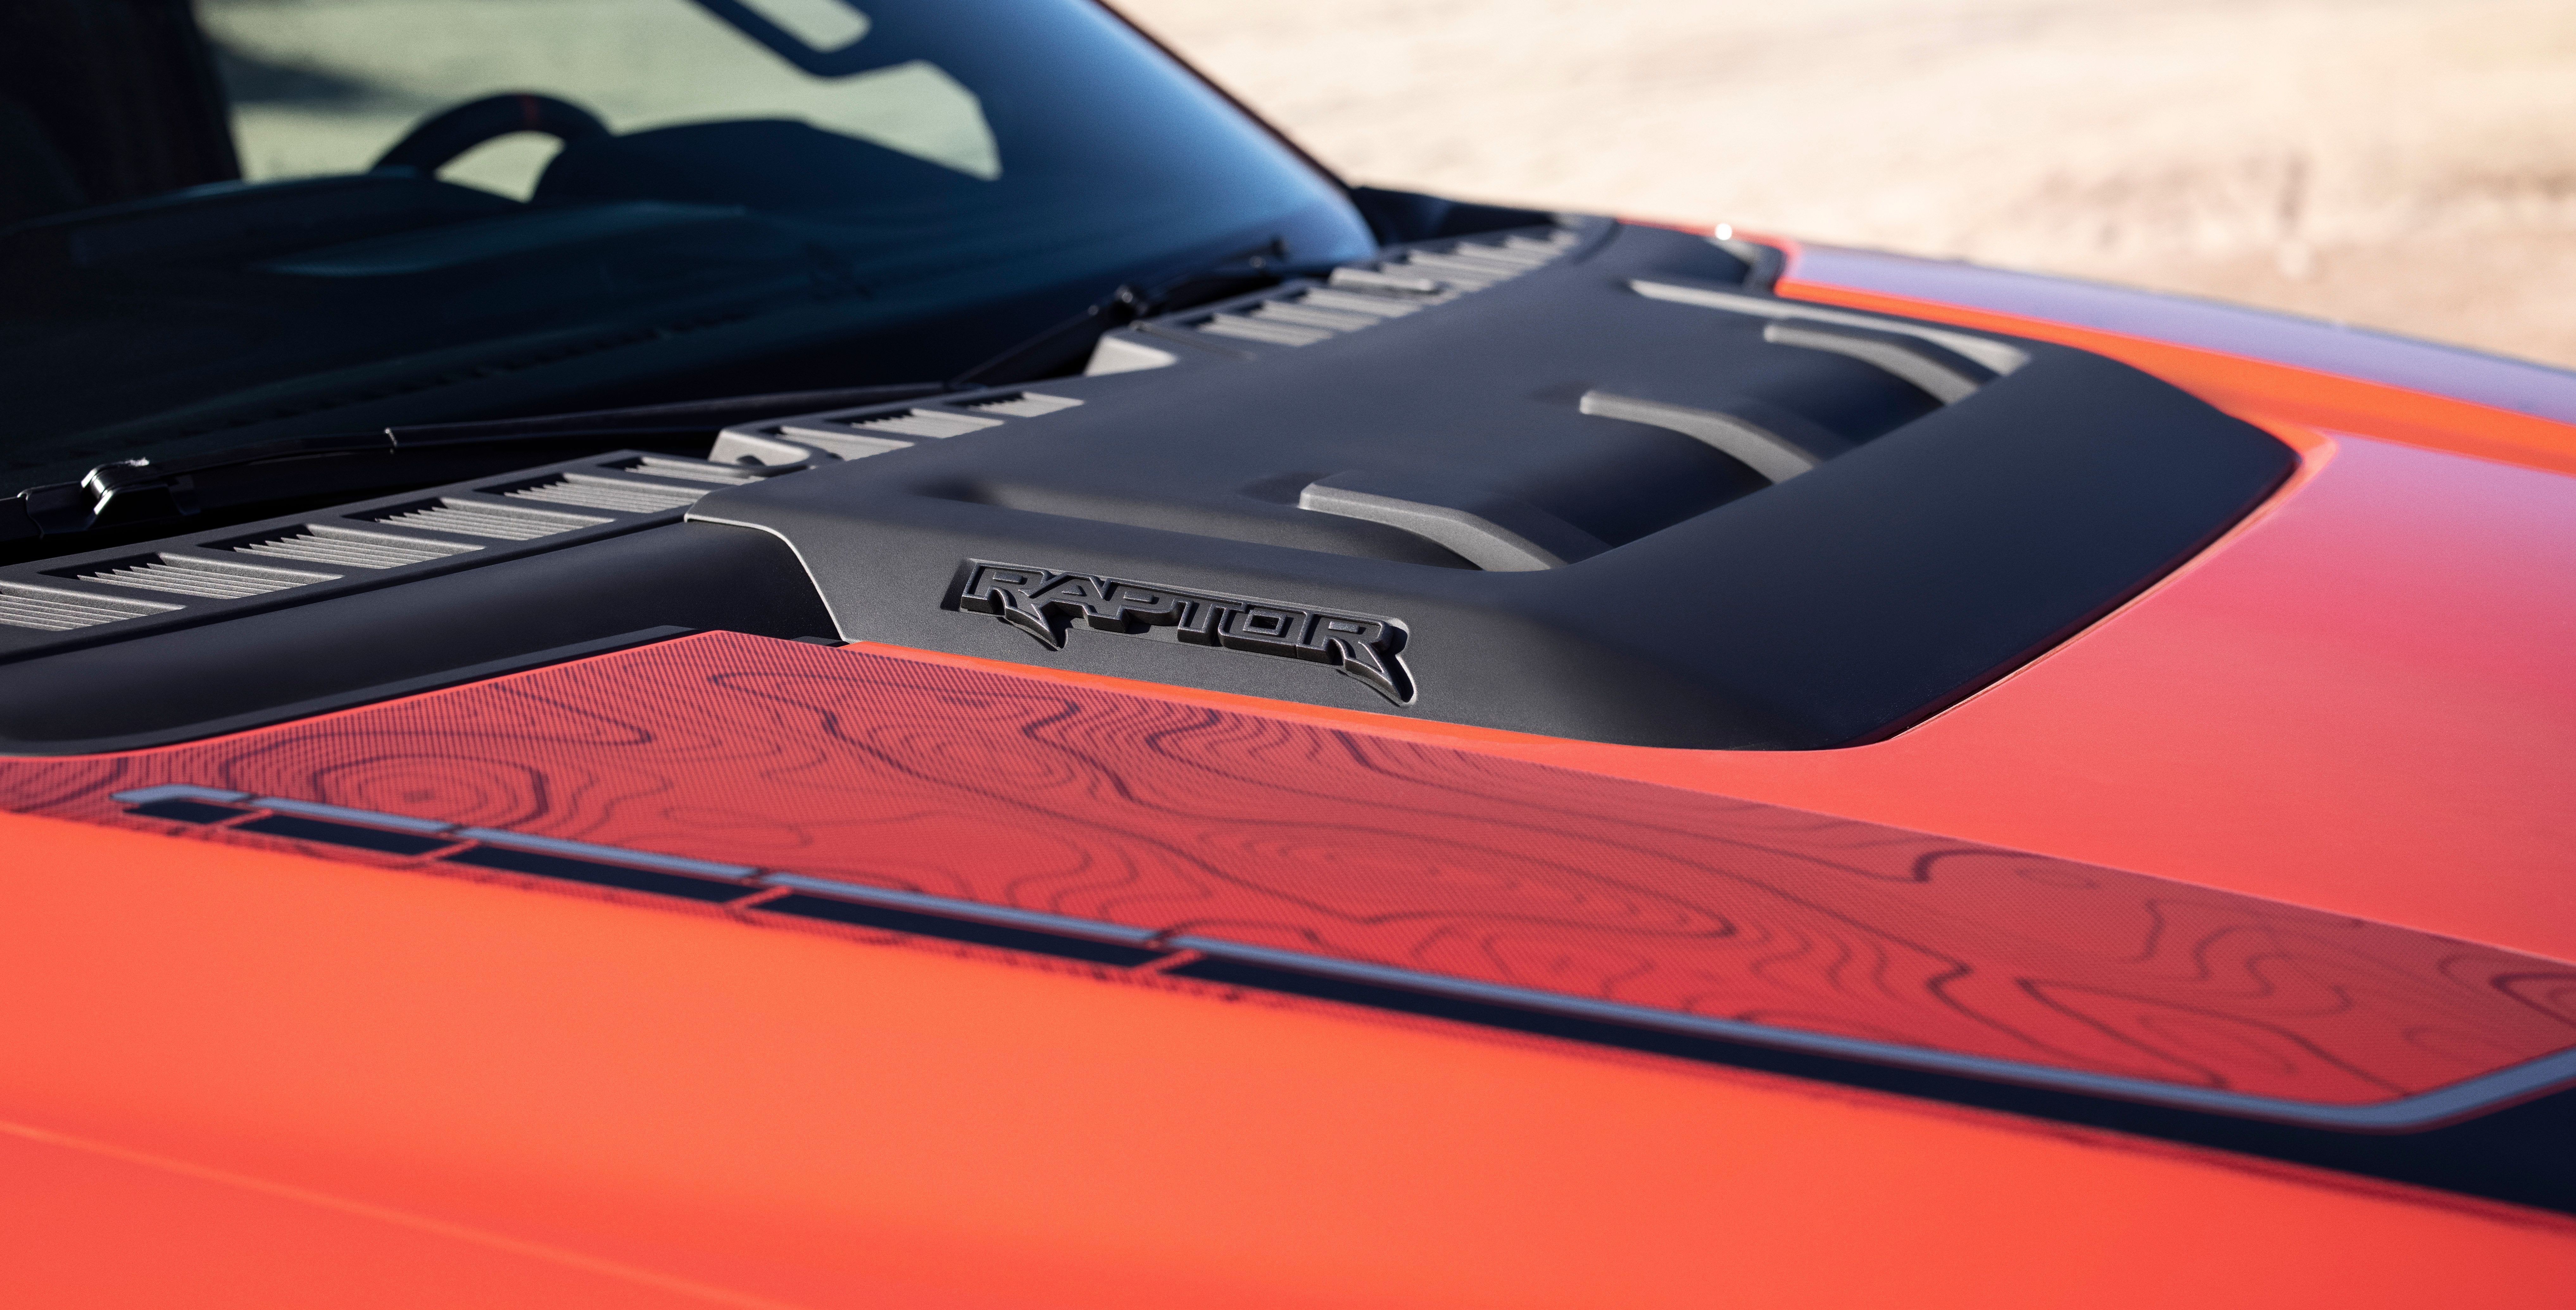 The hood bulge shows Raptor emblazoned on the side of a red 2021 Ford F-150 Raptor pickup